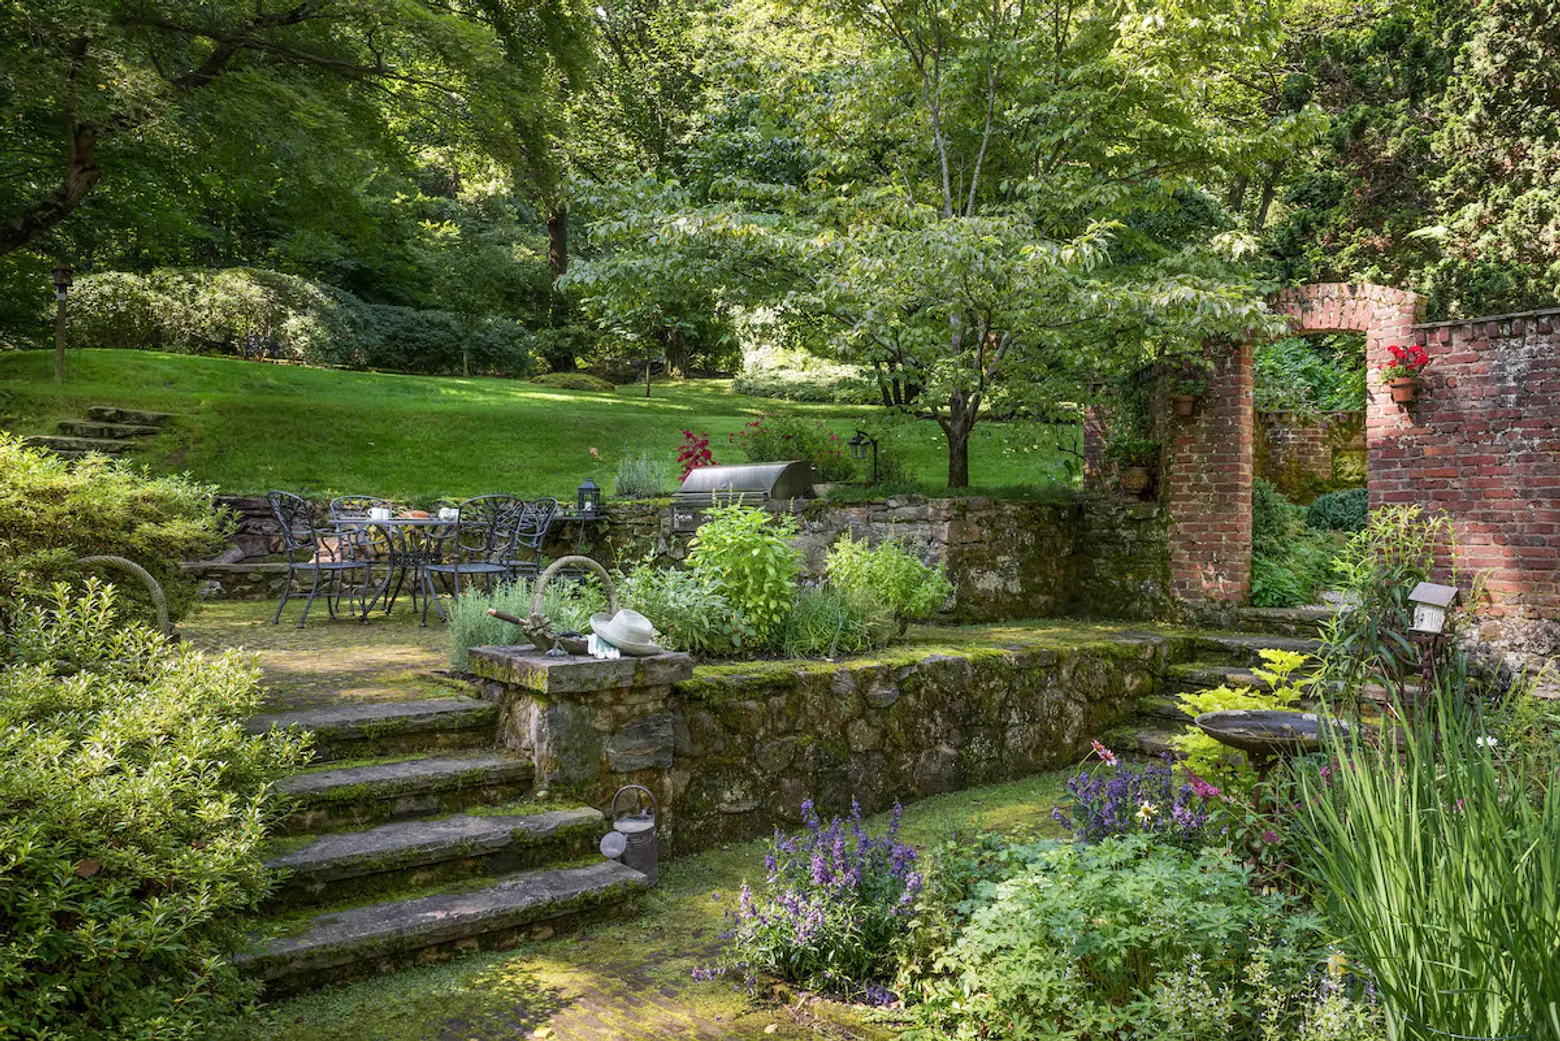 50 Cricket Lane, cool listings, dobbs ferry, westchester, gardens, pools